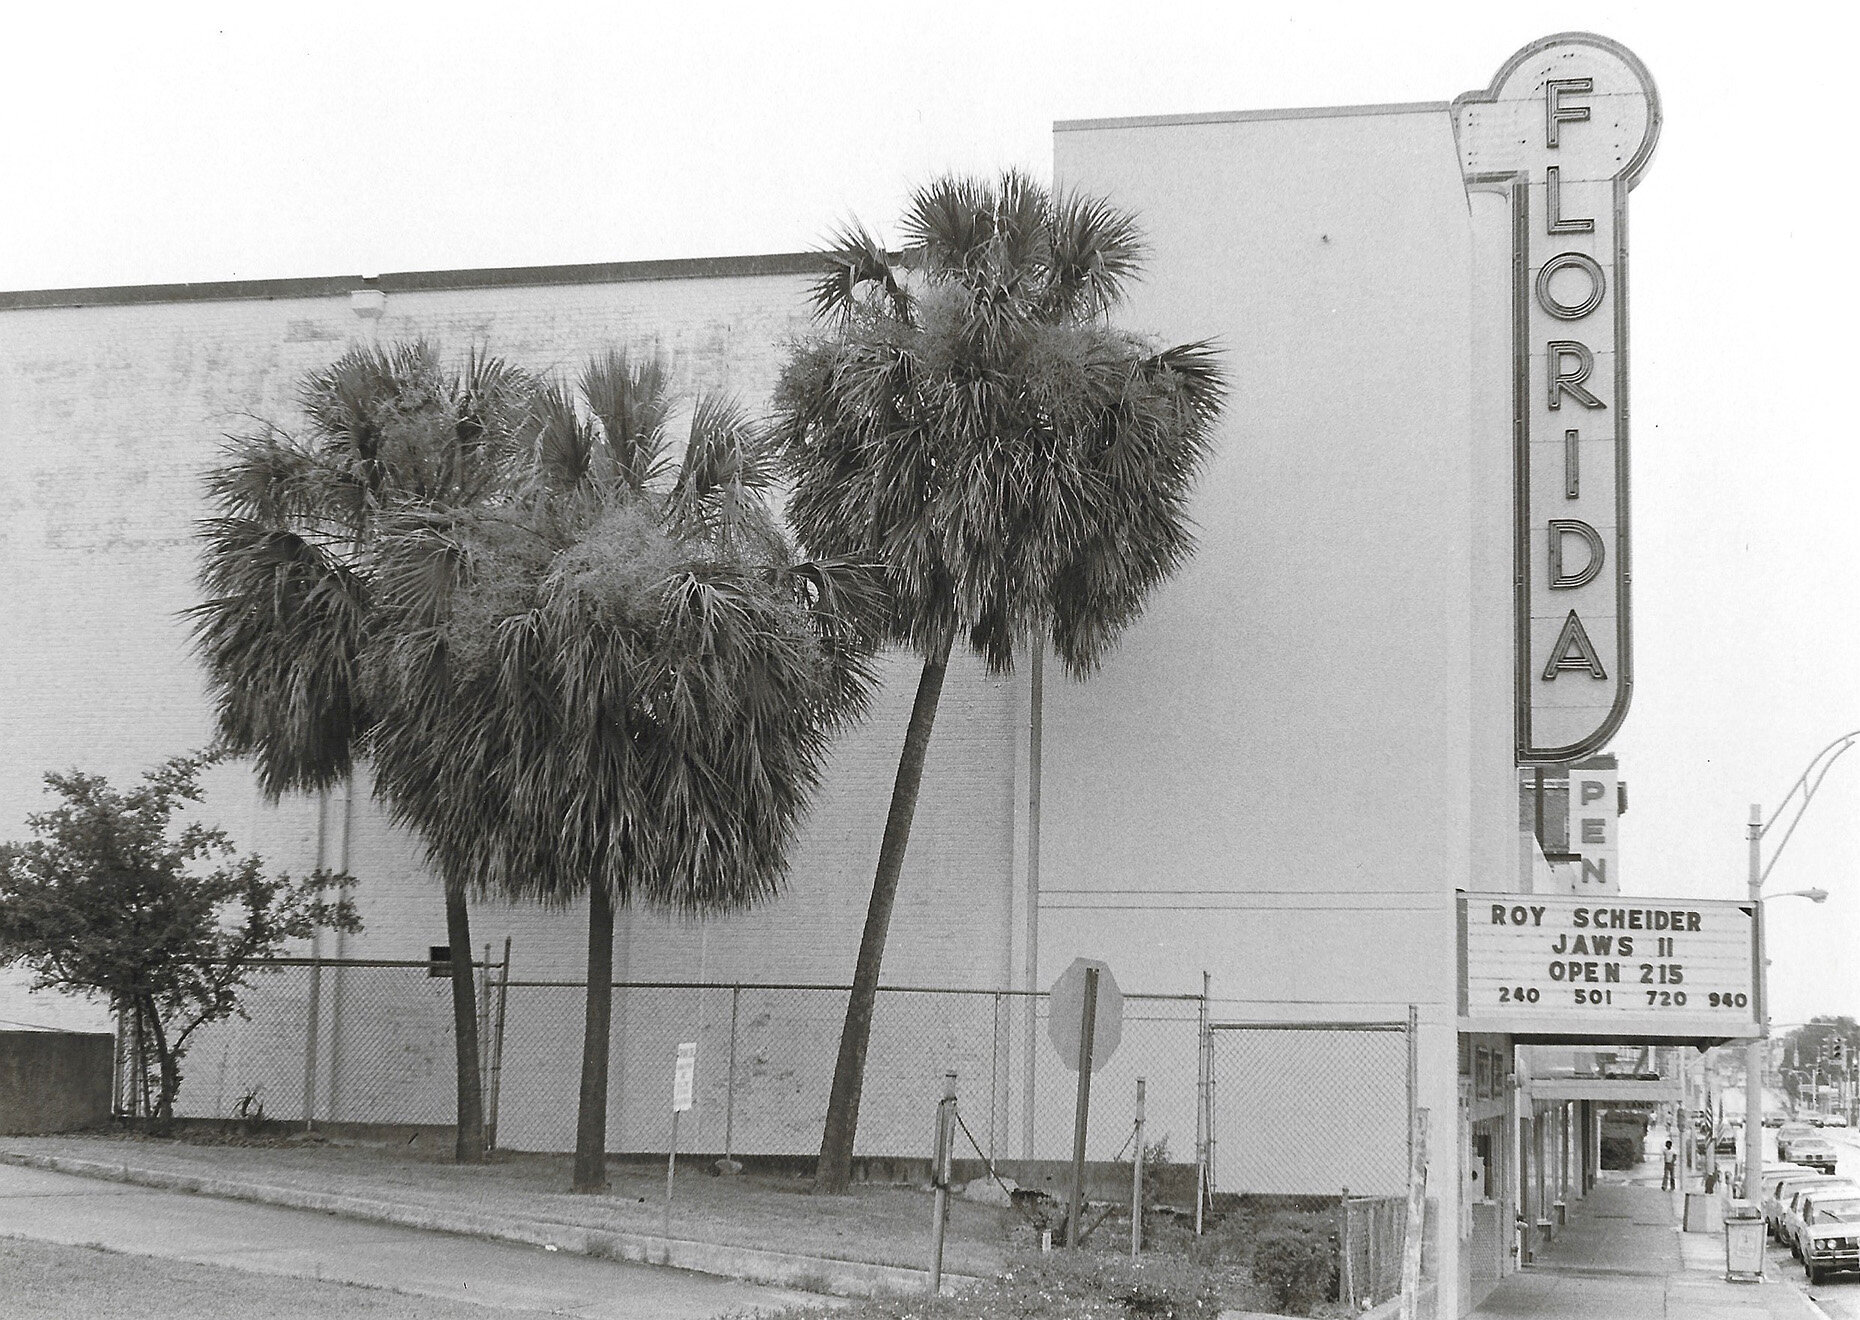   Florida Theater on Monroe Street, Tallahassee, FL,  1978 Gelatin silver print 6 x 8 1⁄4 in. (image size) The Do Good Fund, Inc., 2020-046 